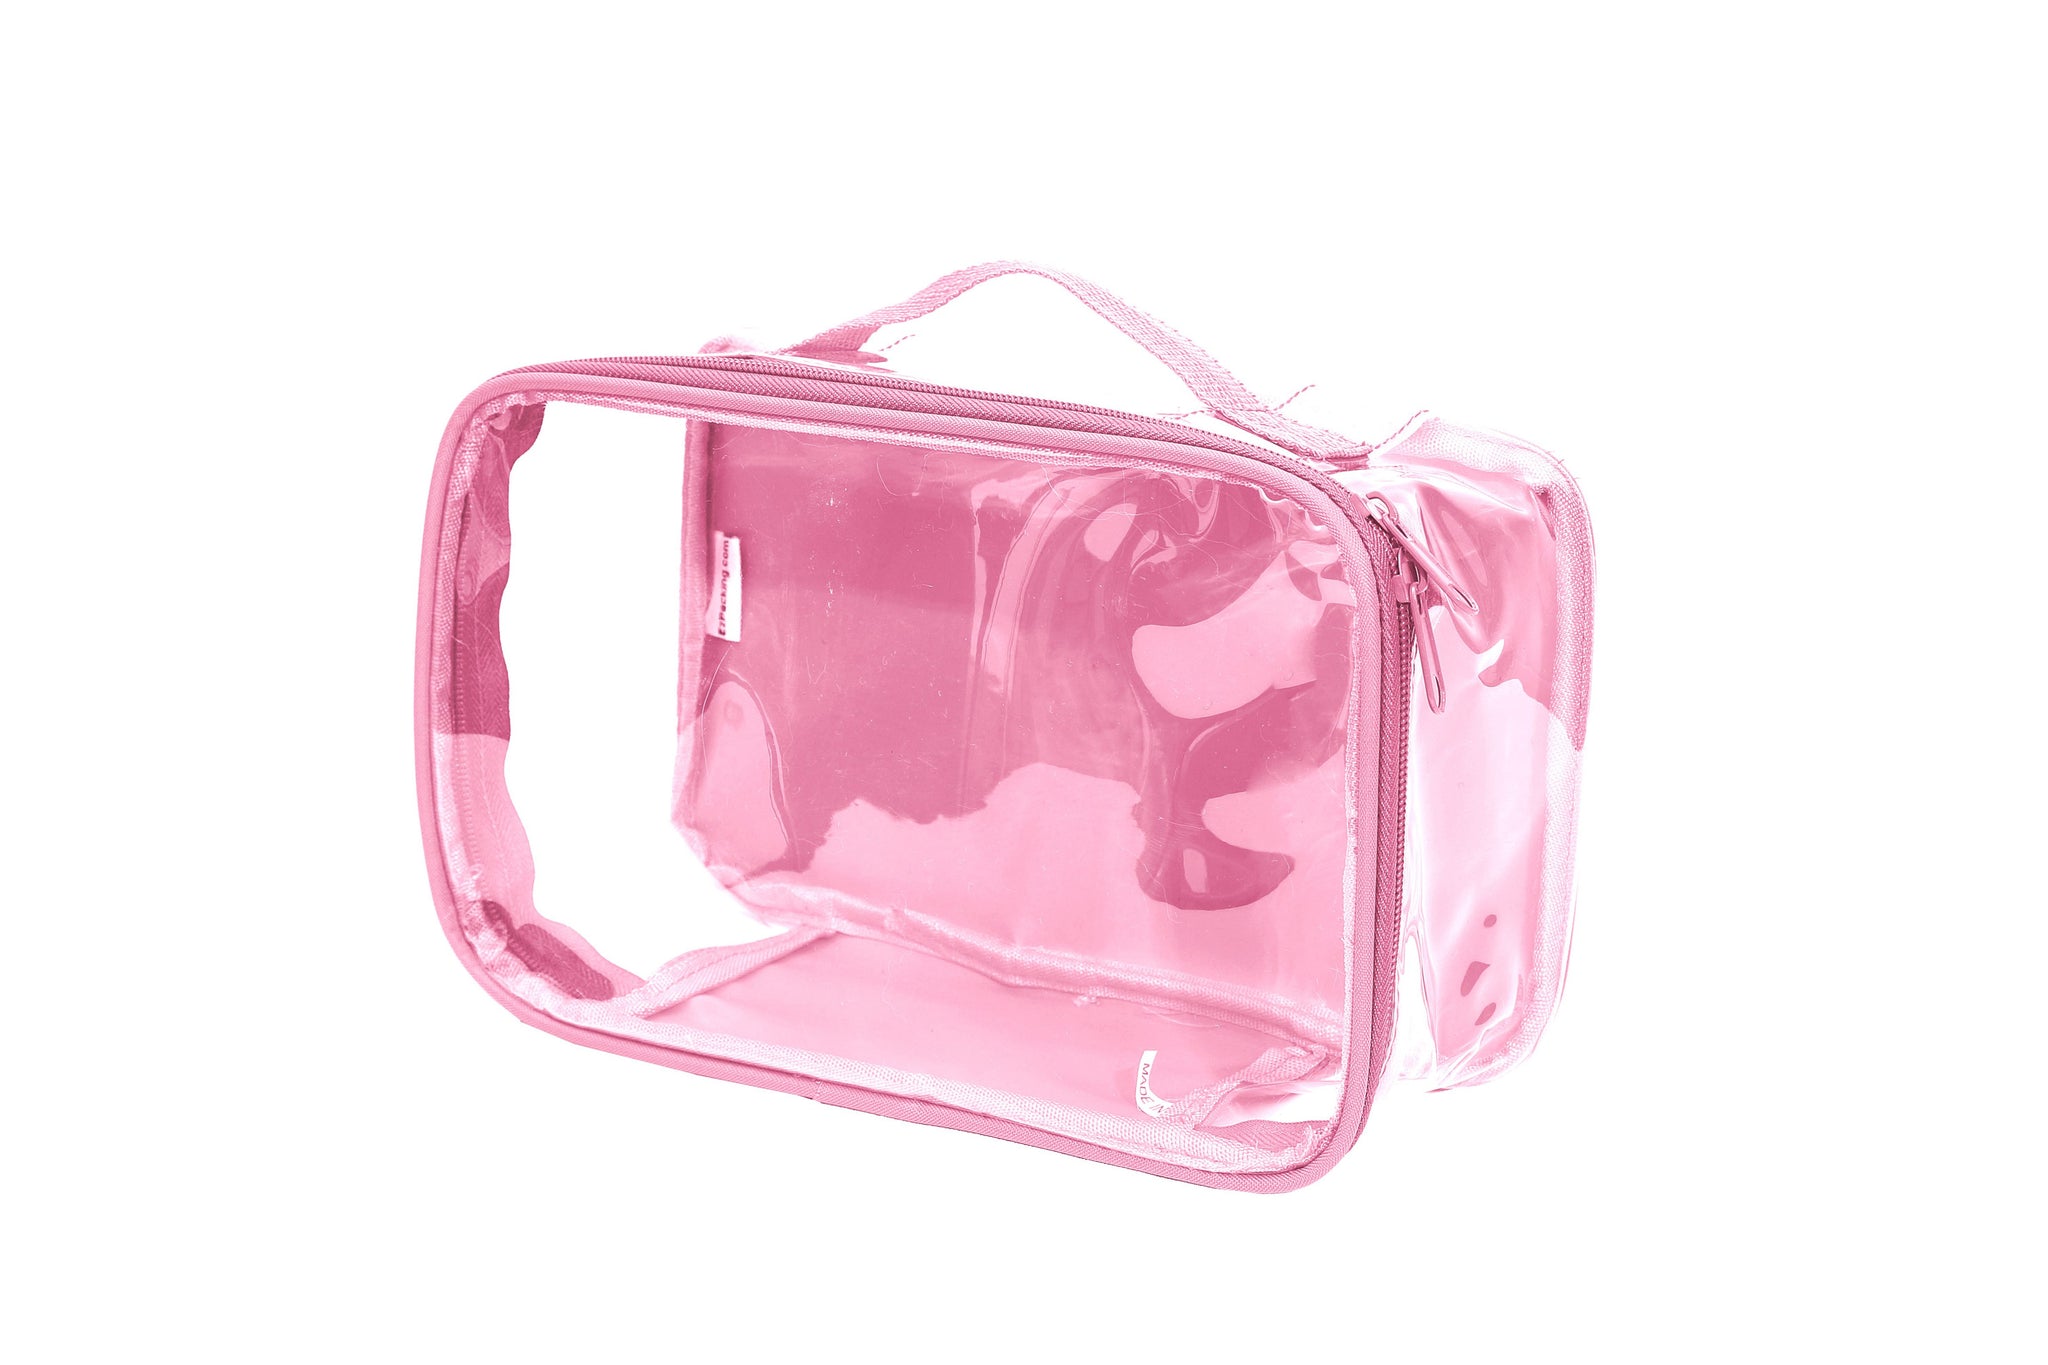 Small Packing Cube for Travel - Clear Suitcase Organizer Pouch with ...